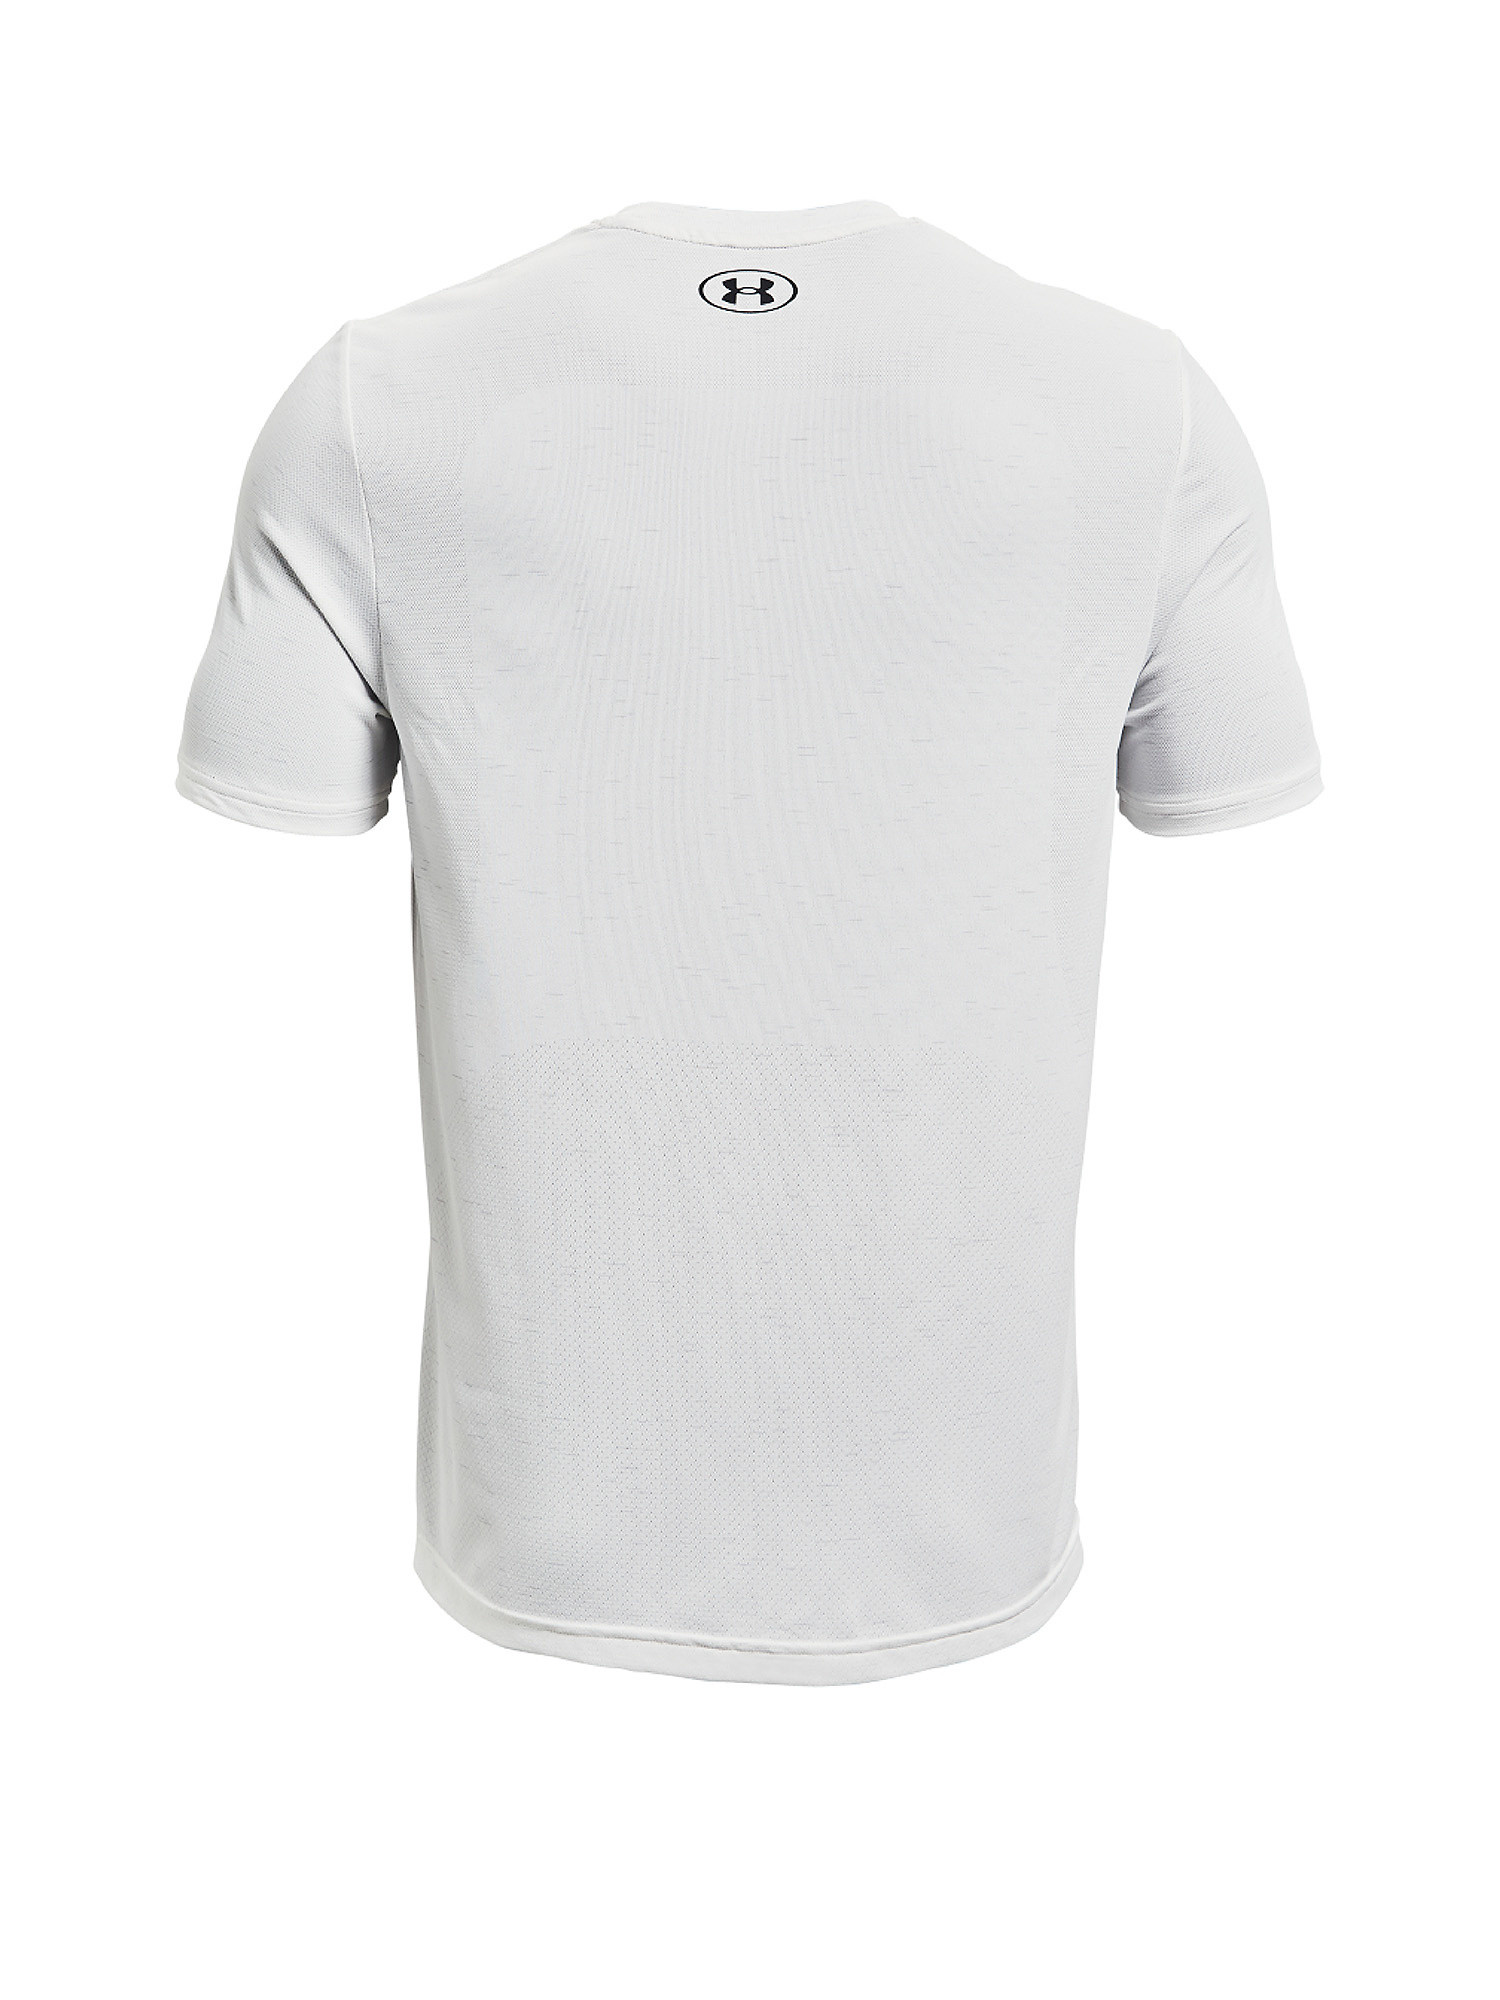 Under Armour - UA Seamless Short Sleeve Top, White, large image number 1